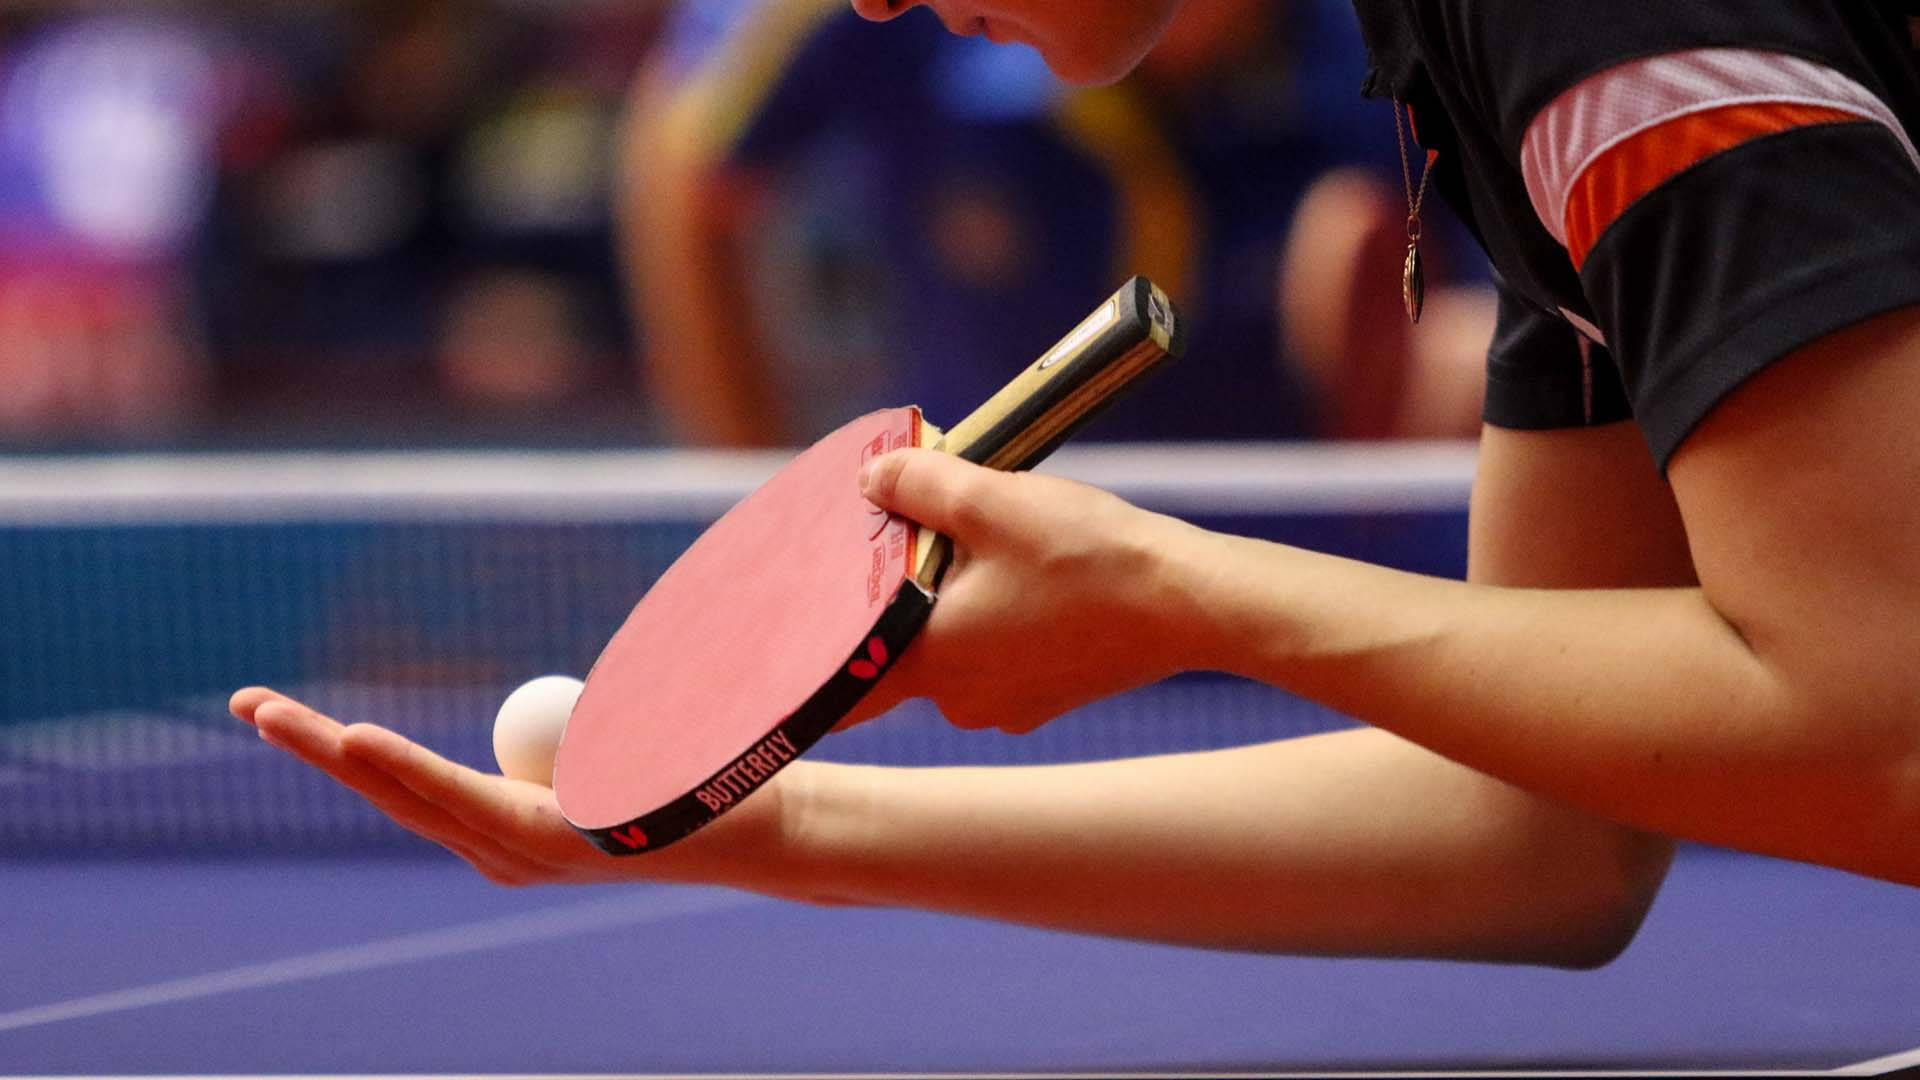 Table Tennis Service Stance Background